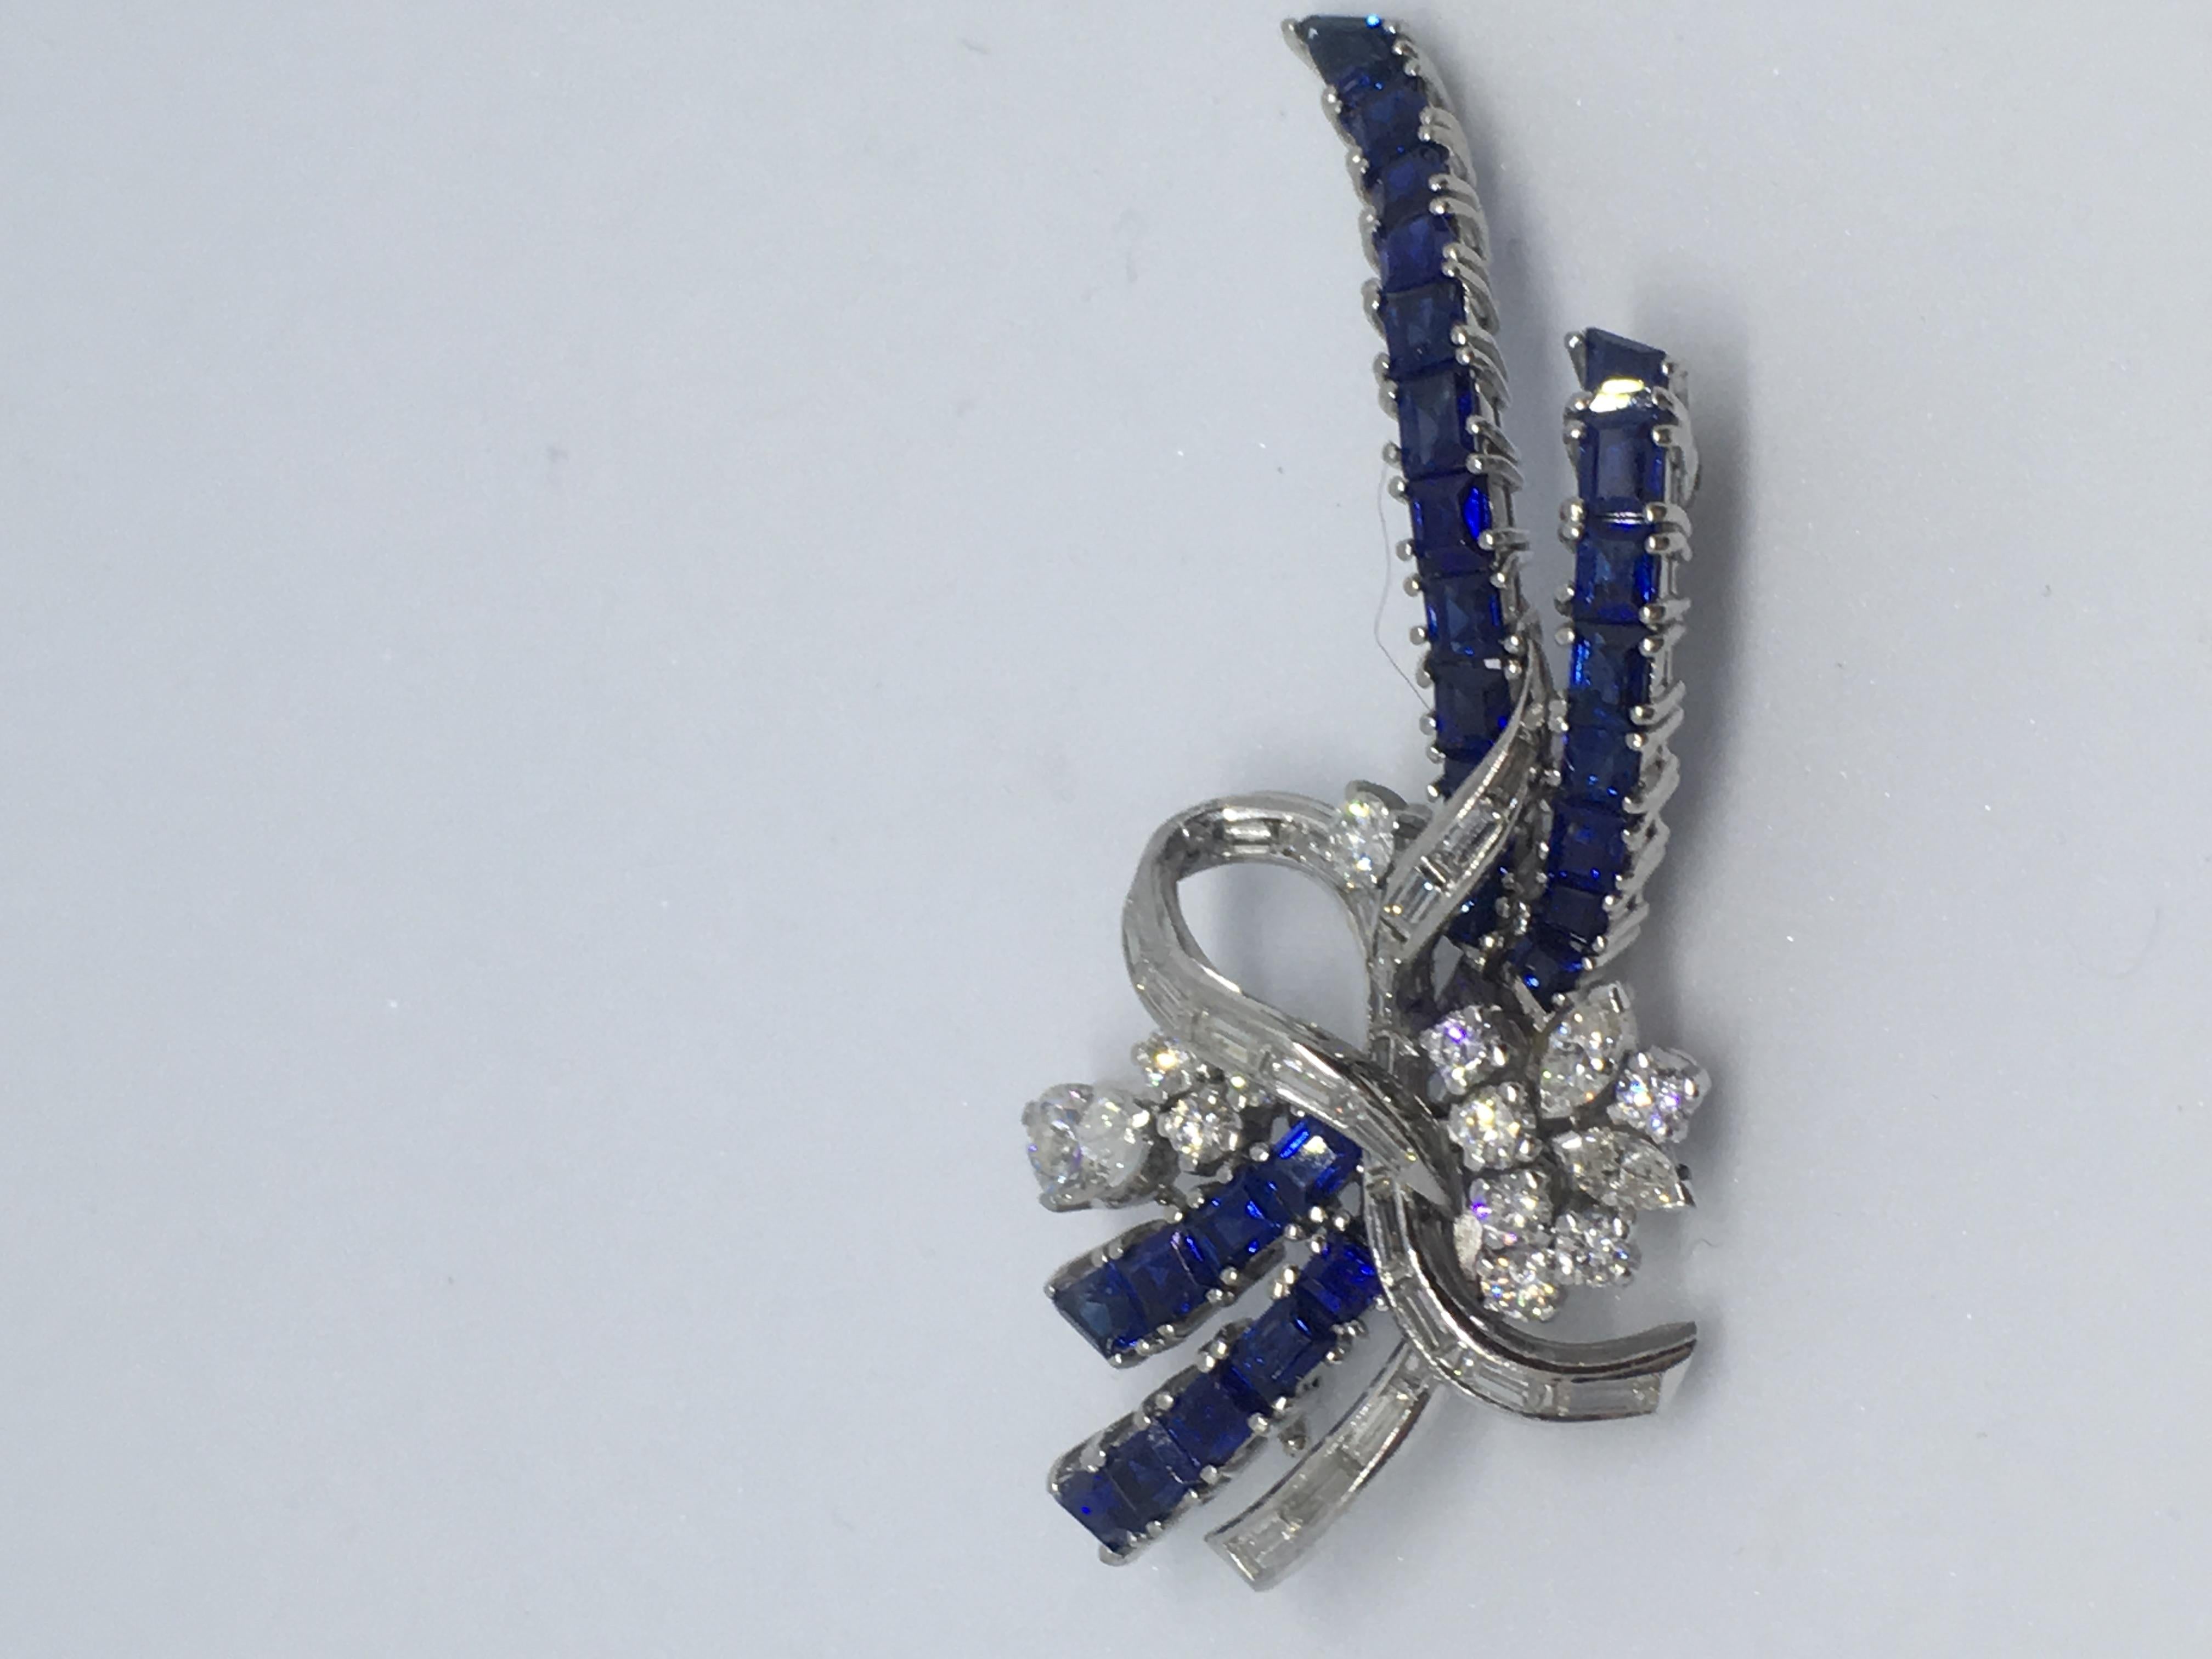 Brooch an abstract ribbon loop set with diamonds and sapphires. The diamond content of the brooch comprises 1 pear-shaped diamond 0.37ct 10 brilliant-cut diamonds .0.07 to0.03ct 2 marquises cut diamonds 0.07ct each. There are 20 baguette-cut